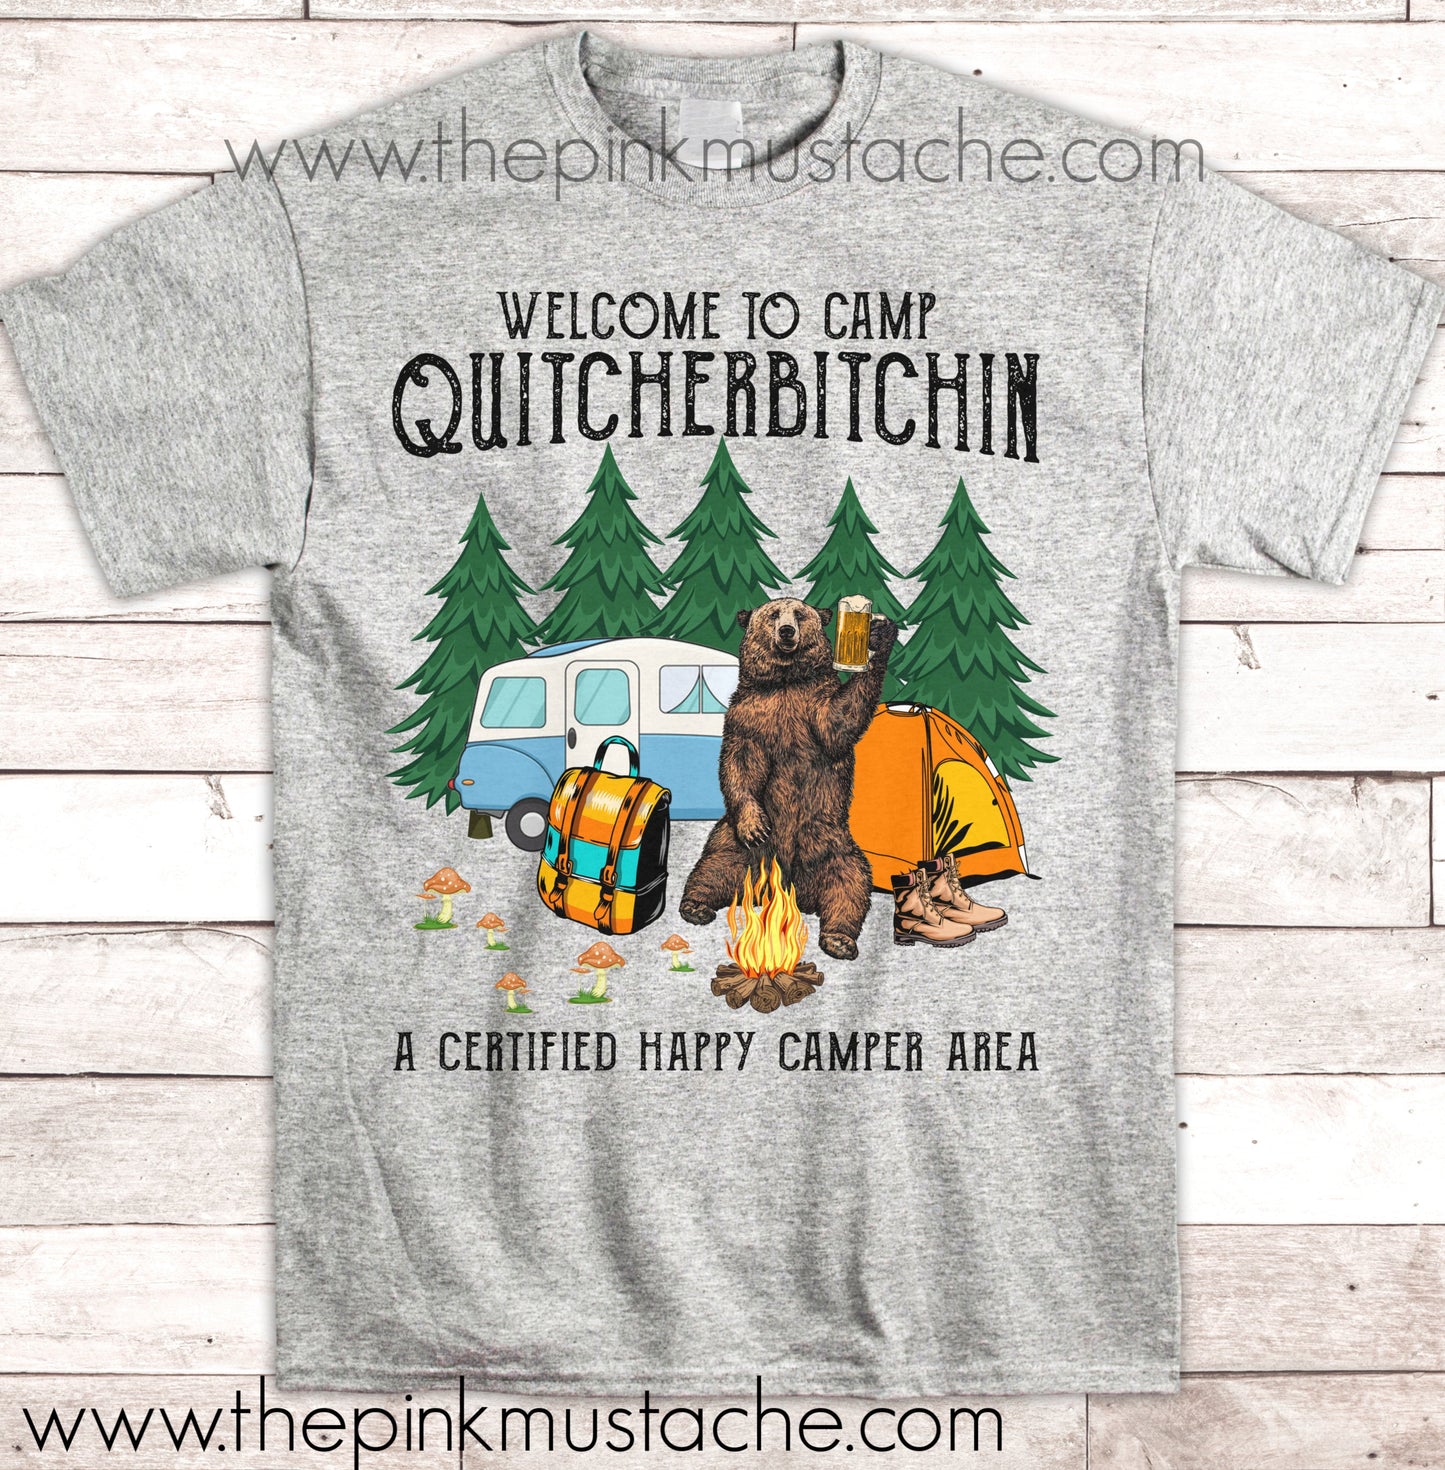 Welcome to Camp "QuitCherBitchin" - A Certified Happy Camper Area/ Funny Drinking Shirt / Unisex Mens Shirt